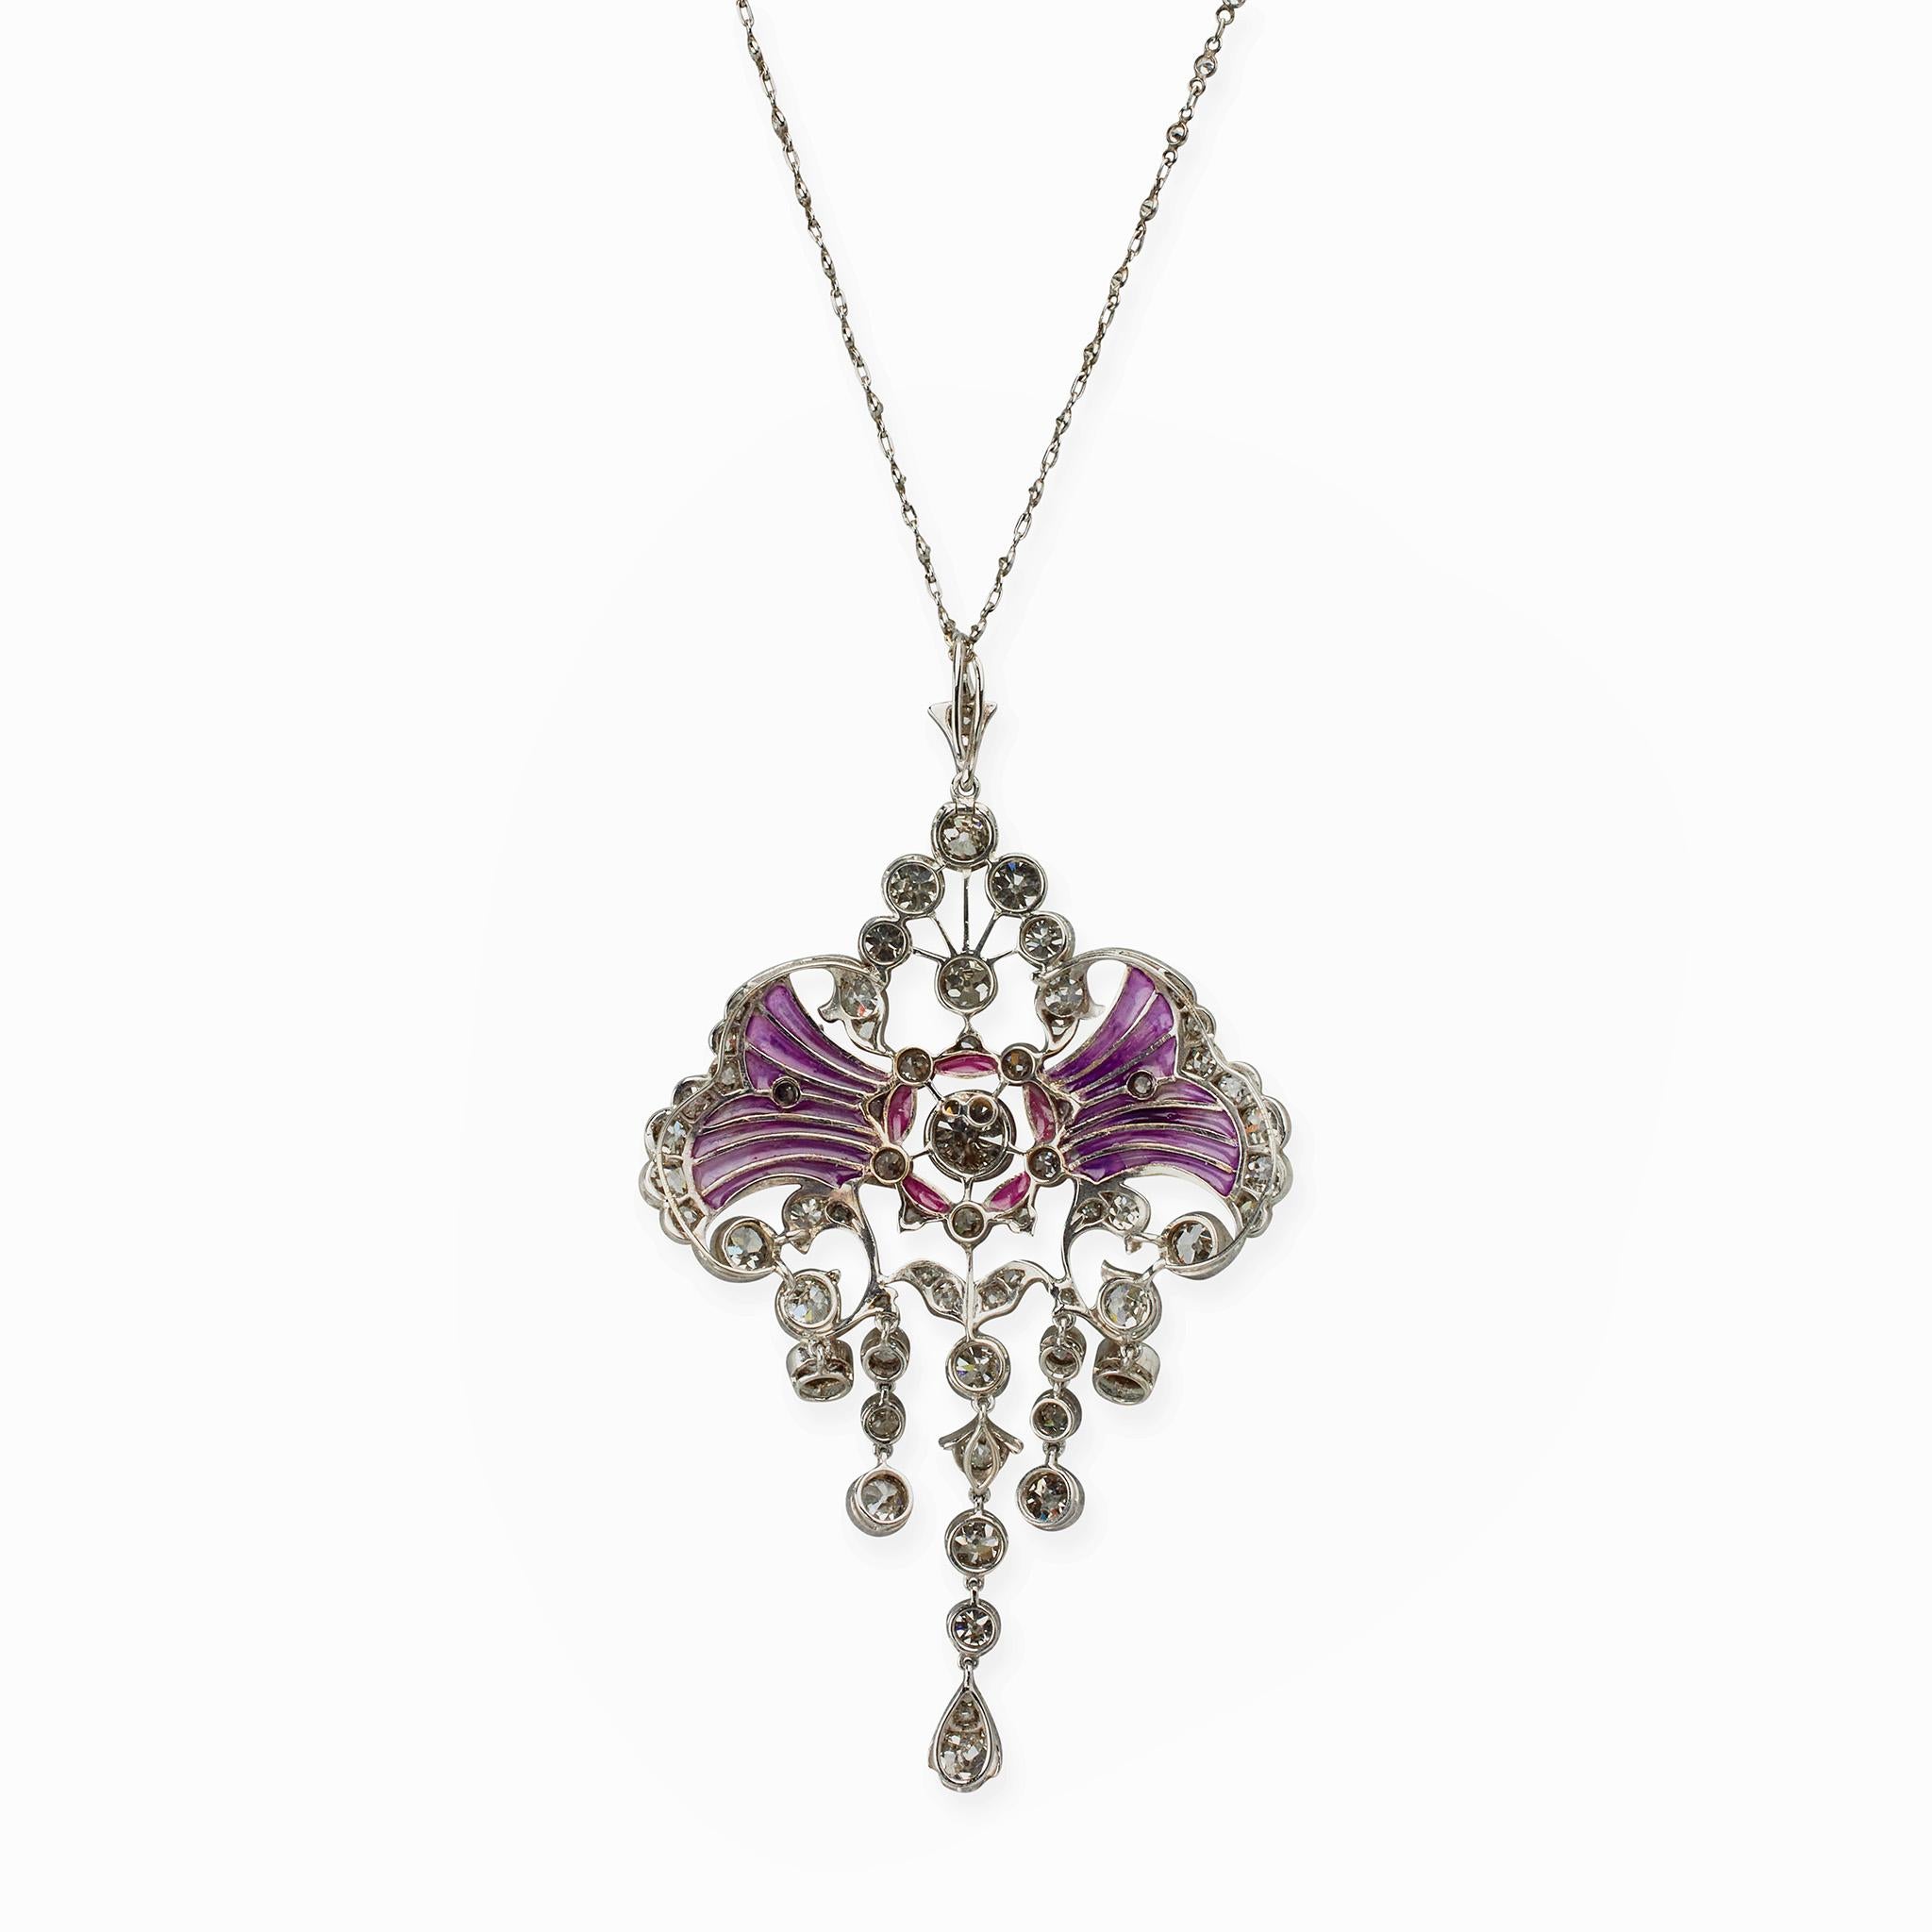 Created around 1910, this Edwardian pendant necklace is composed of diamonds, plique-à-jour enamel and platinum. The scrolling floral and foliate motif pendant is composed of old European and old mine-cut diamonds enhanced by panels of lilac and